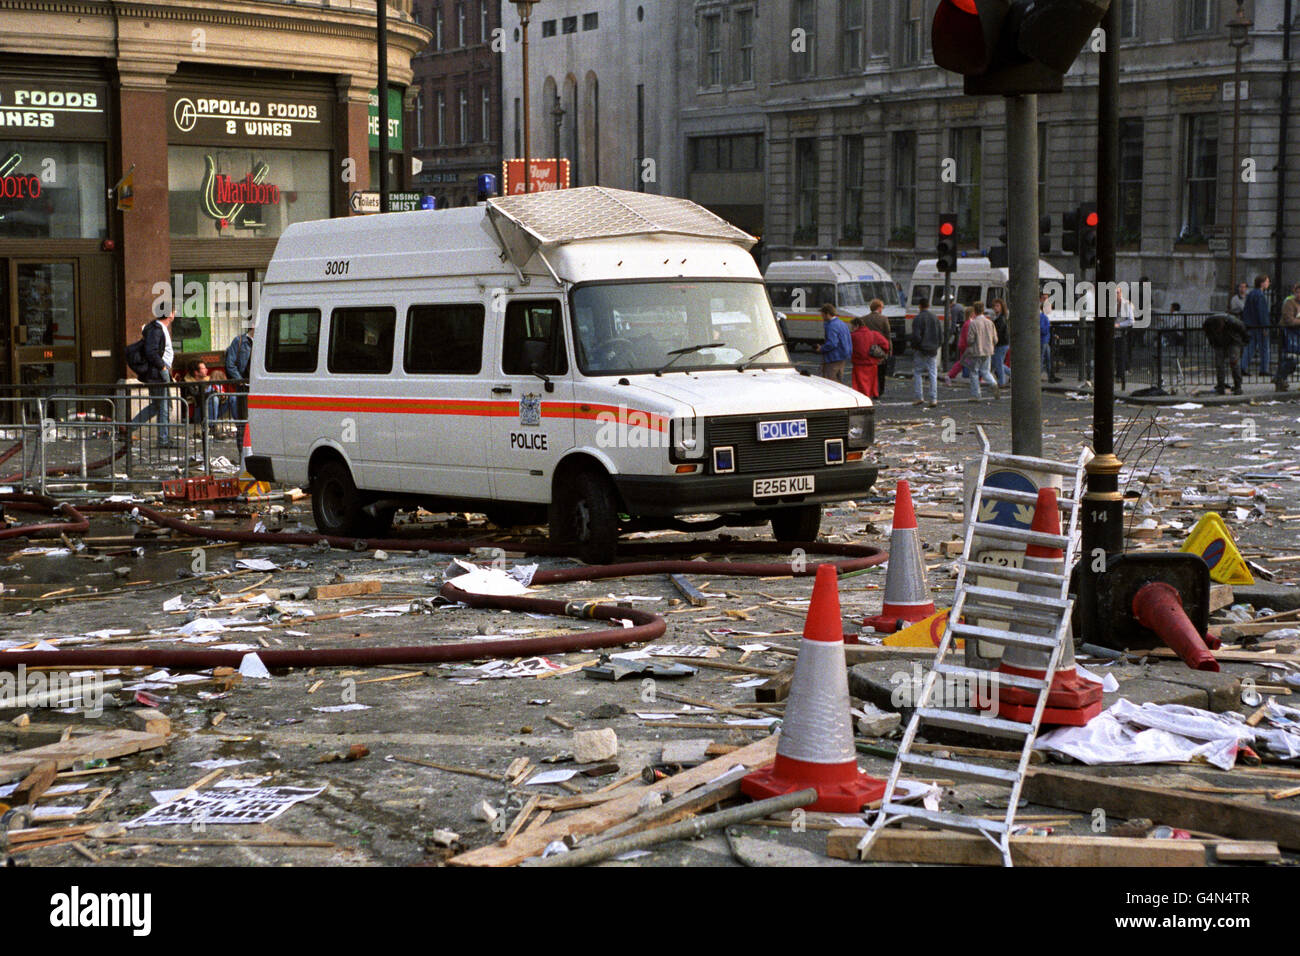 A deserted police van amid the debris caused by violent anti-poll tax demonstrations in central London. Stock Photo